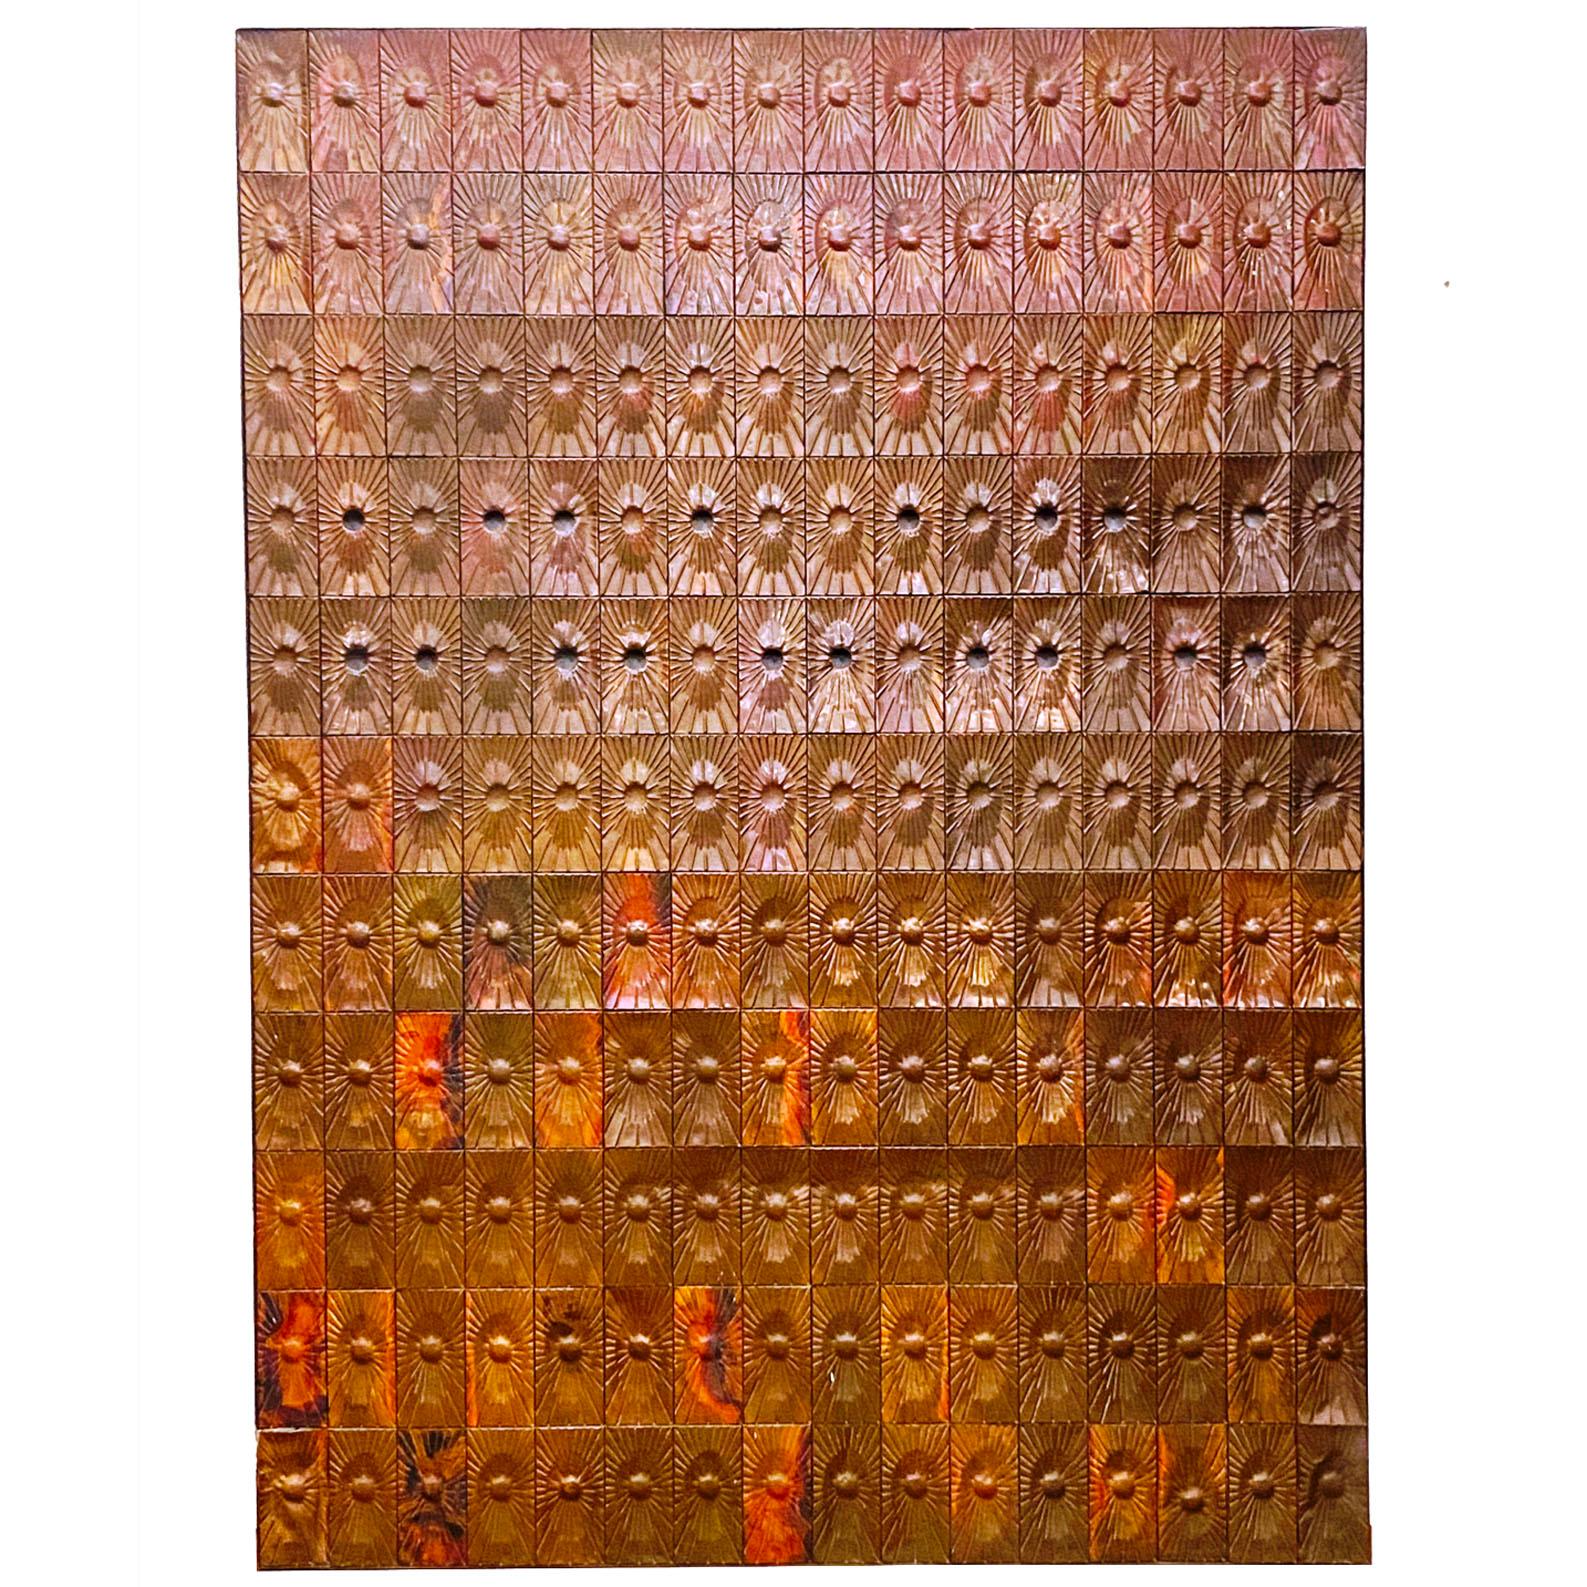 Copper Wall Panelling Cladding by Edit Oborzil, 1971 Art Object Panel For Sale 1